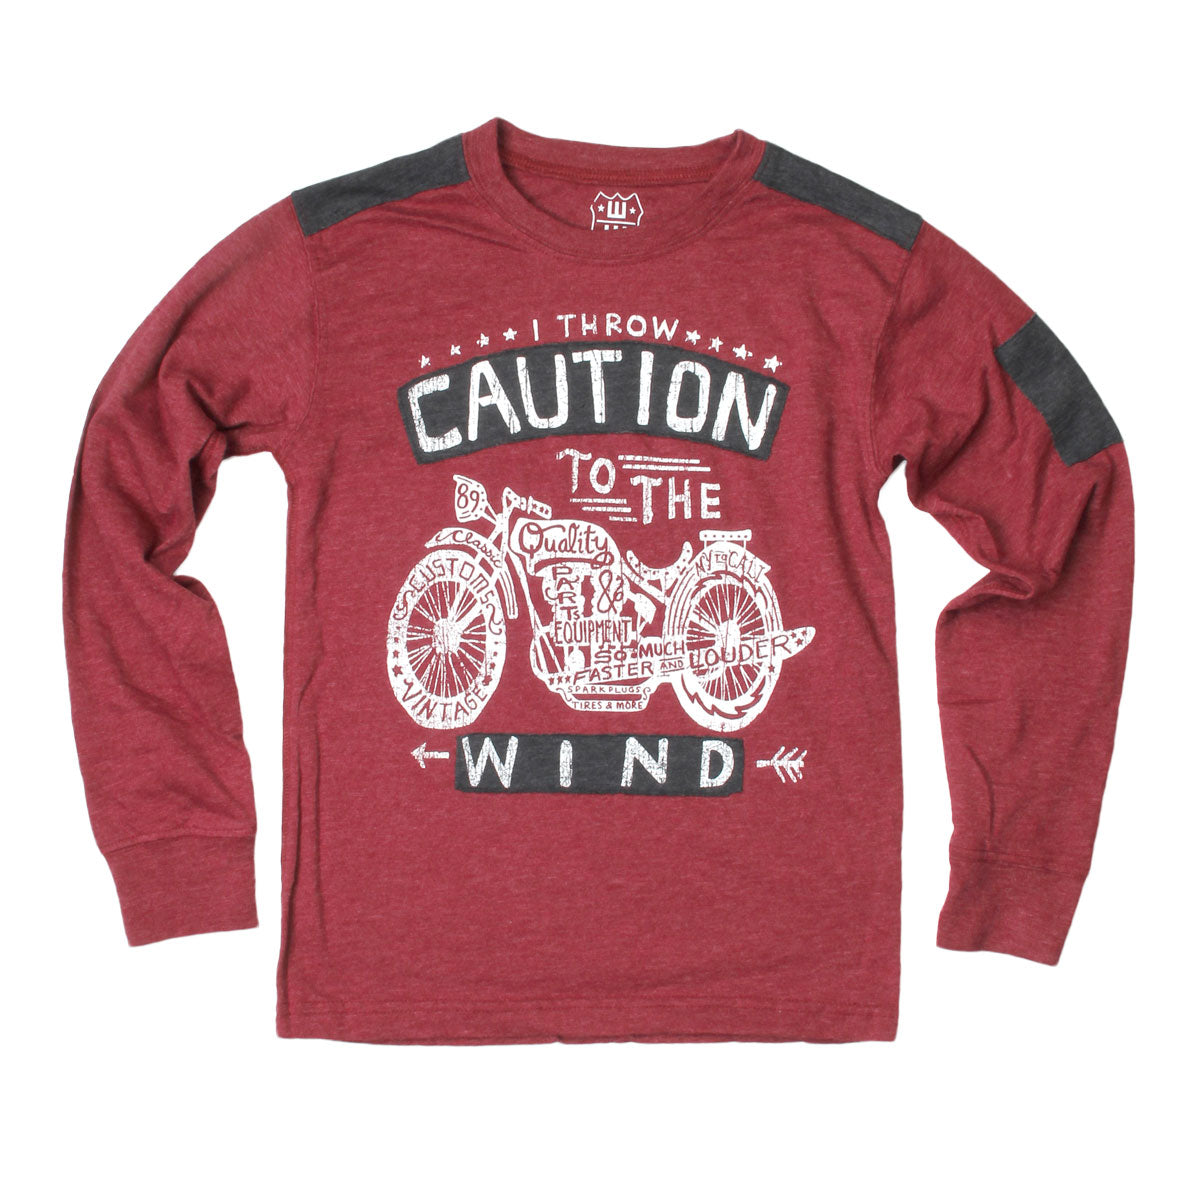 Youth Caution to the Wind Tee